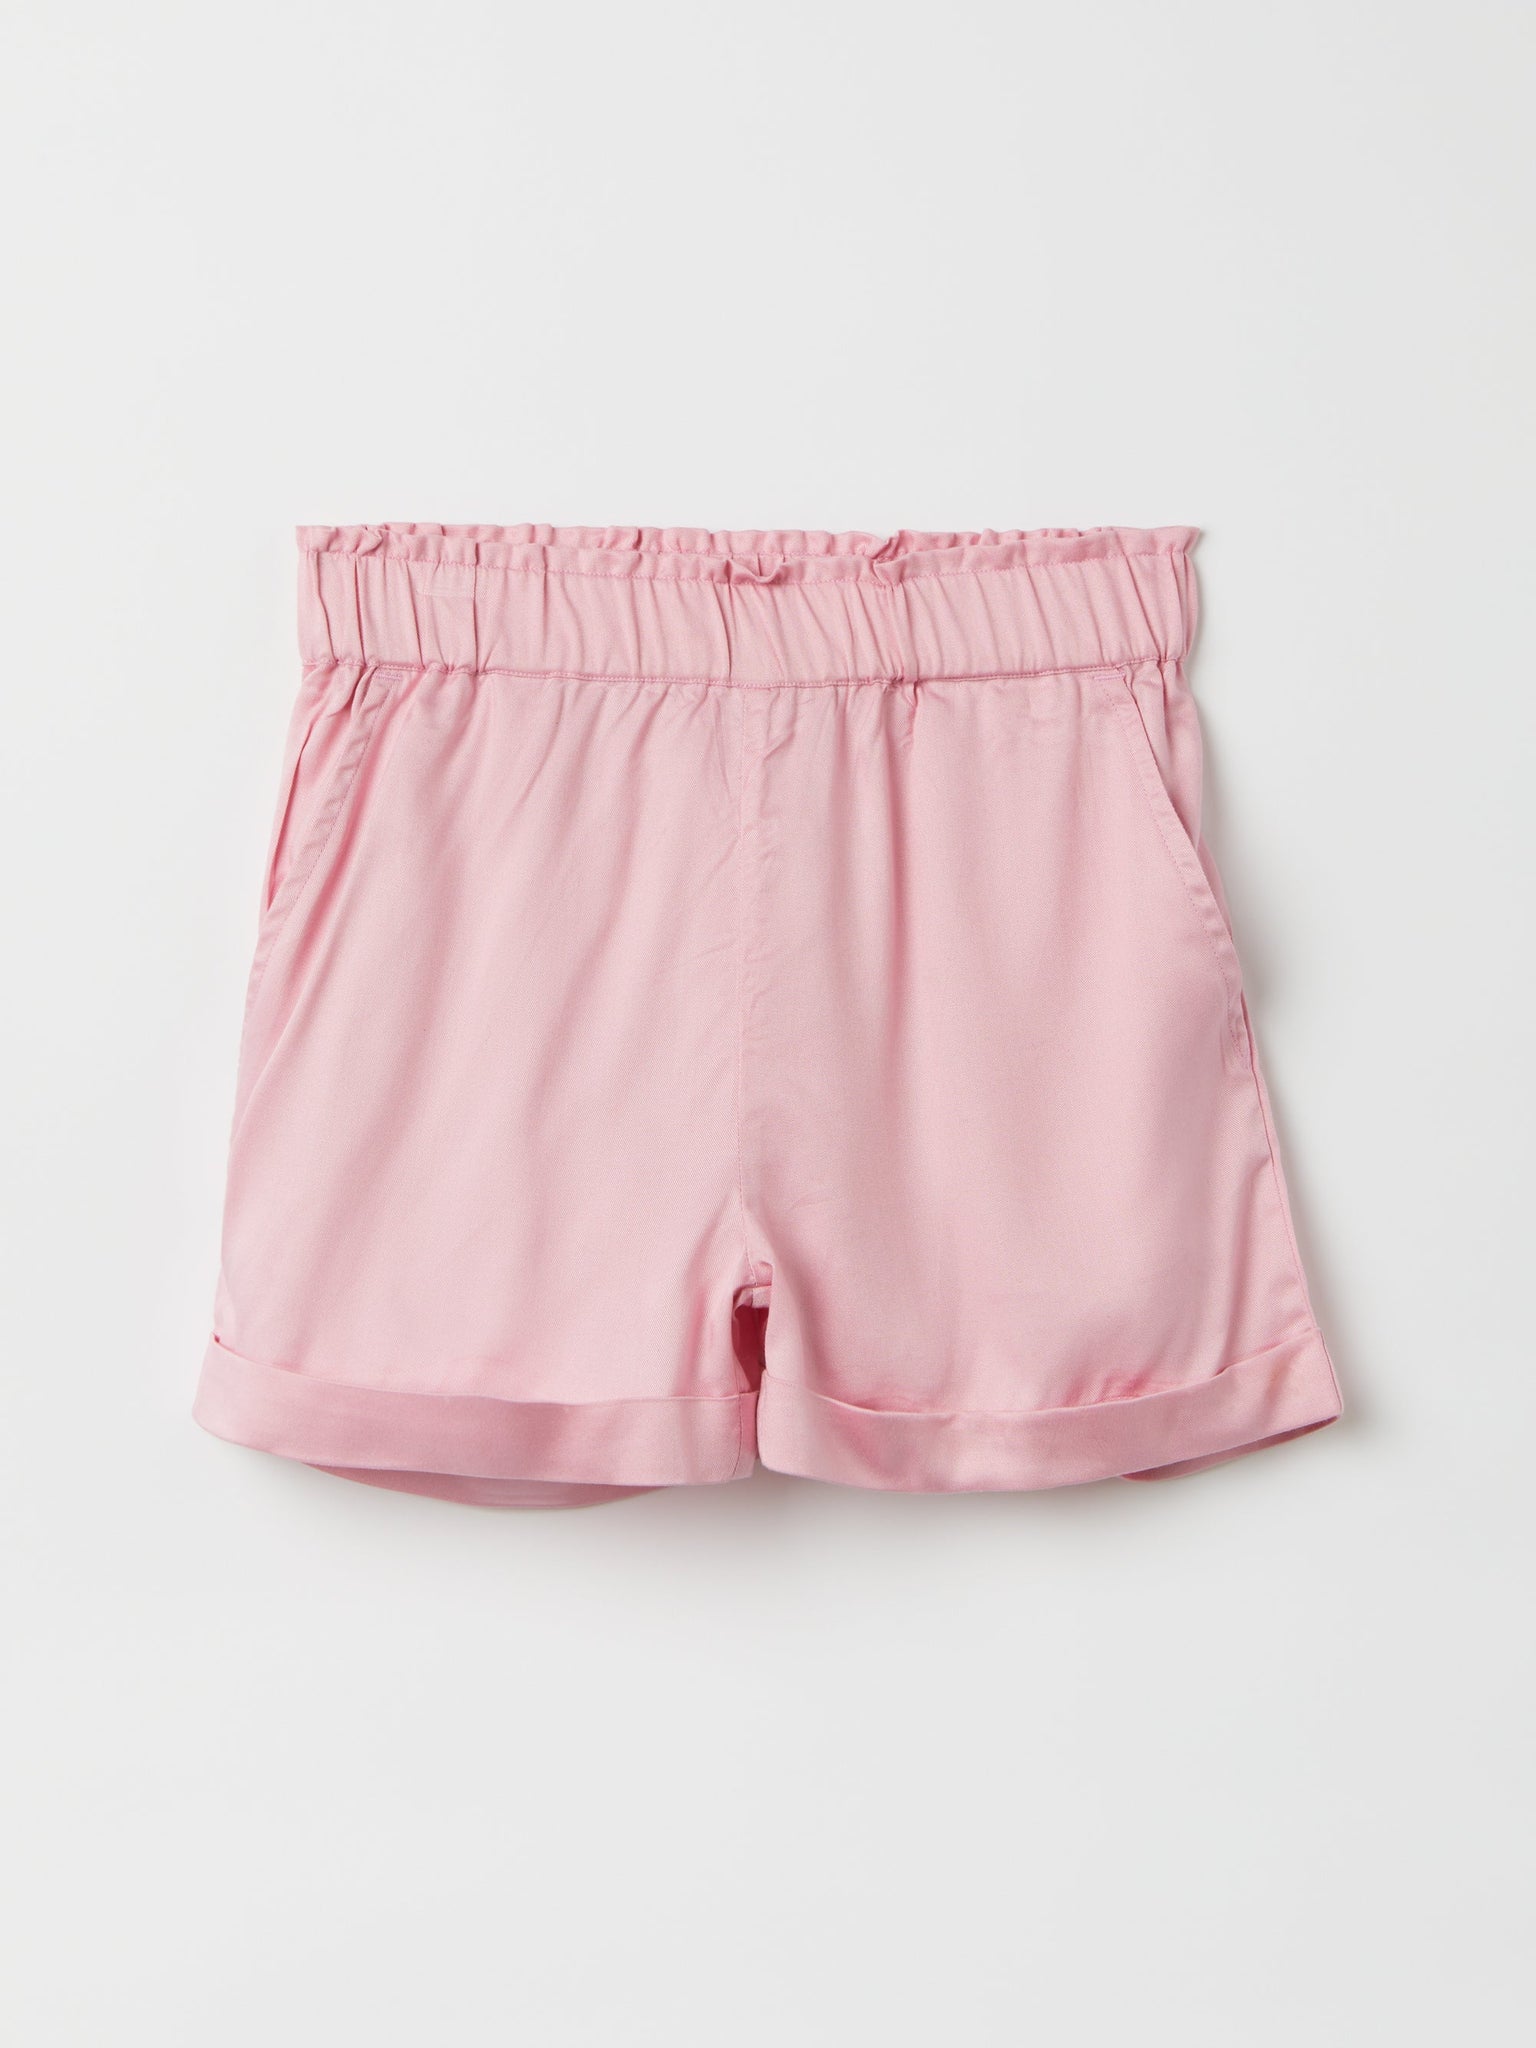 Pink Floaty Kids Shorts from the Polarn O. Pyret kidswear collection. Clothes made using sustainably sourced materials.